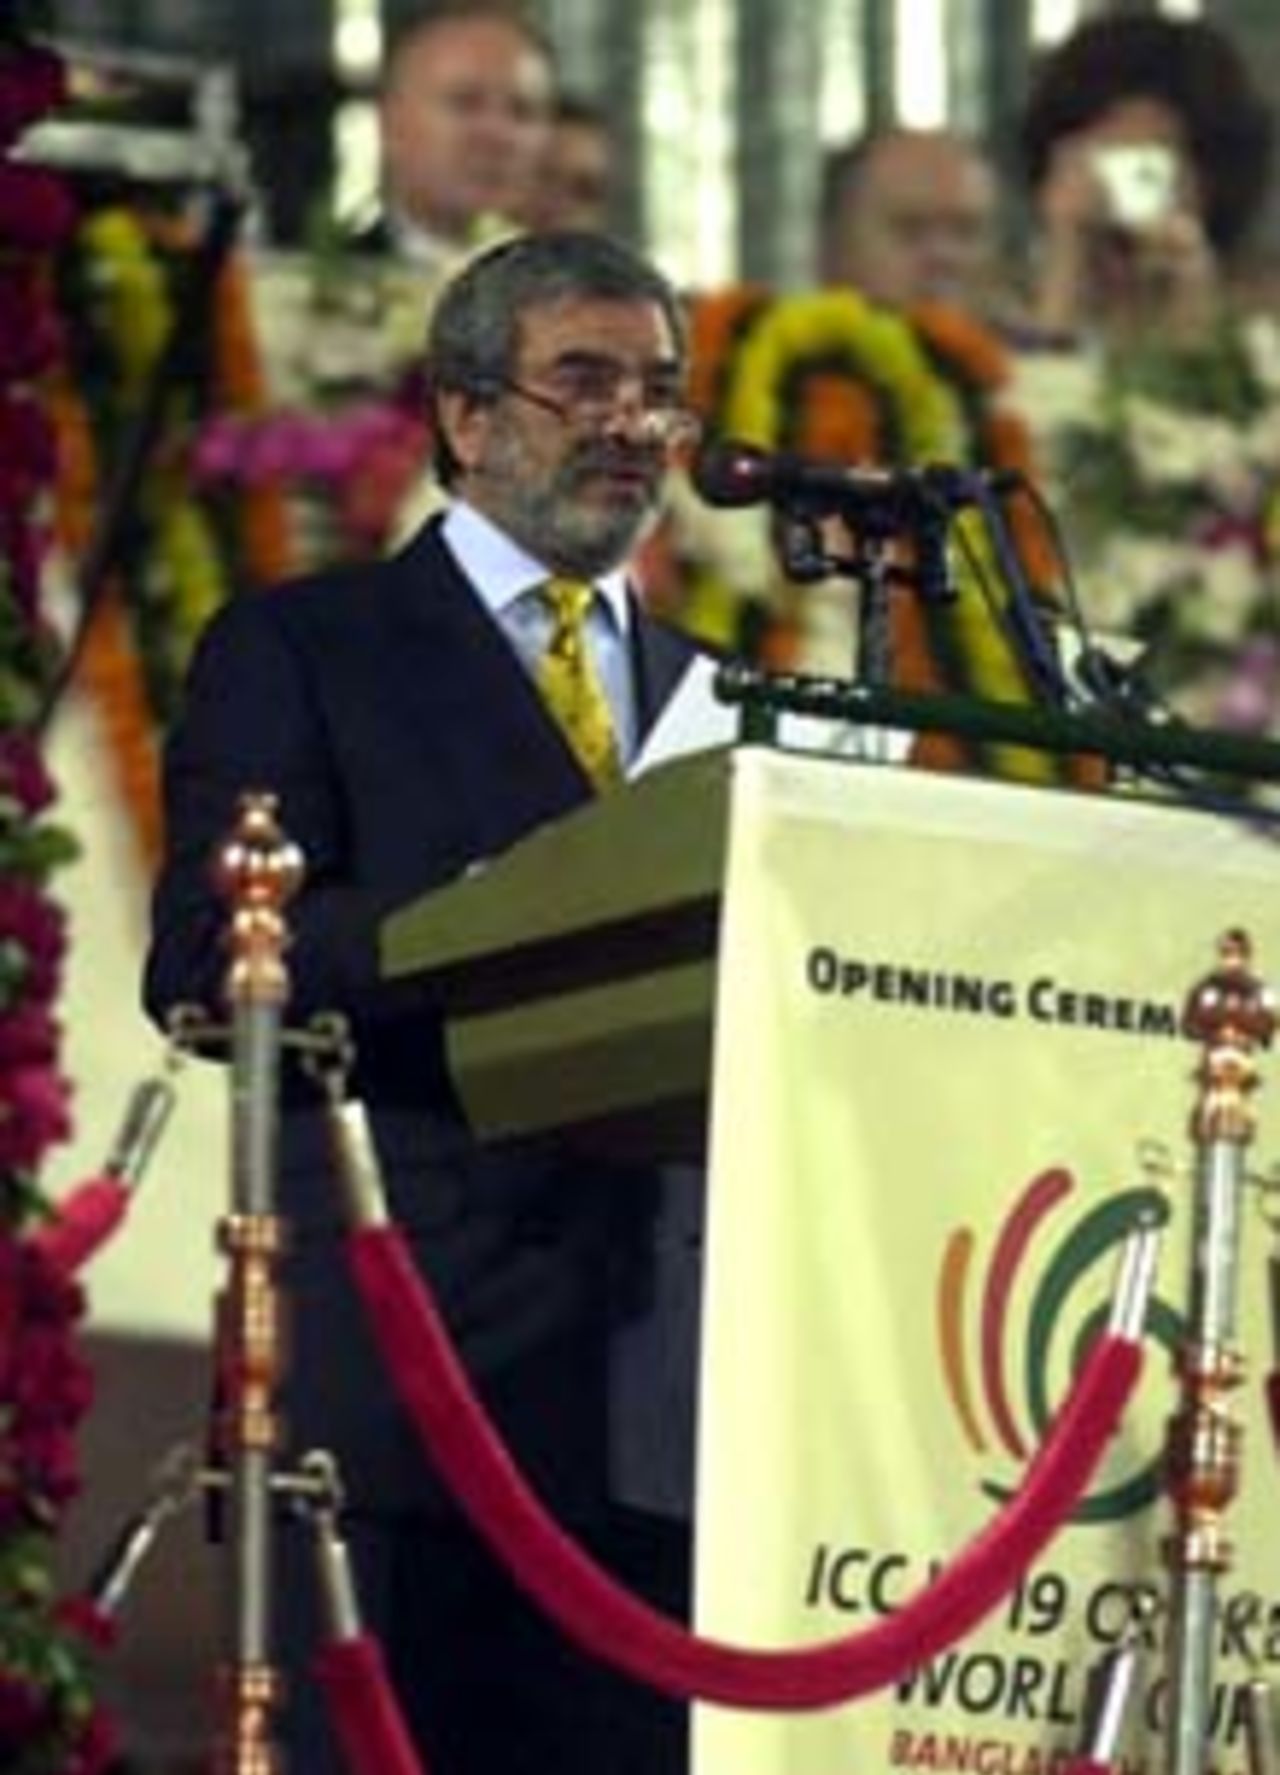 ICC President Ehsan Mani at the ICC U/19 Cricket World Cup opening ceremony